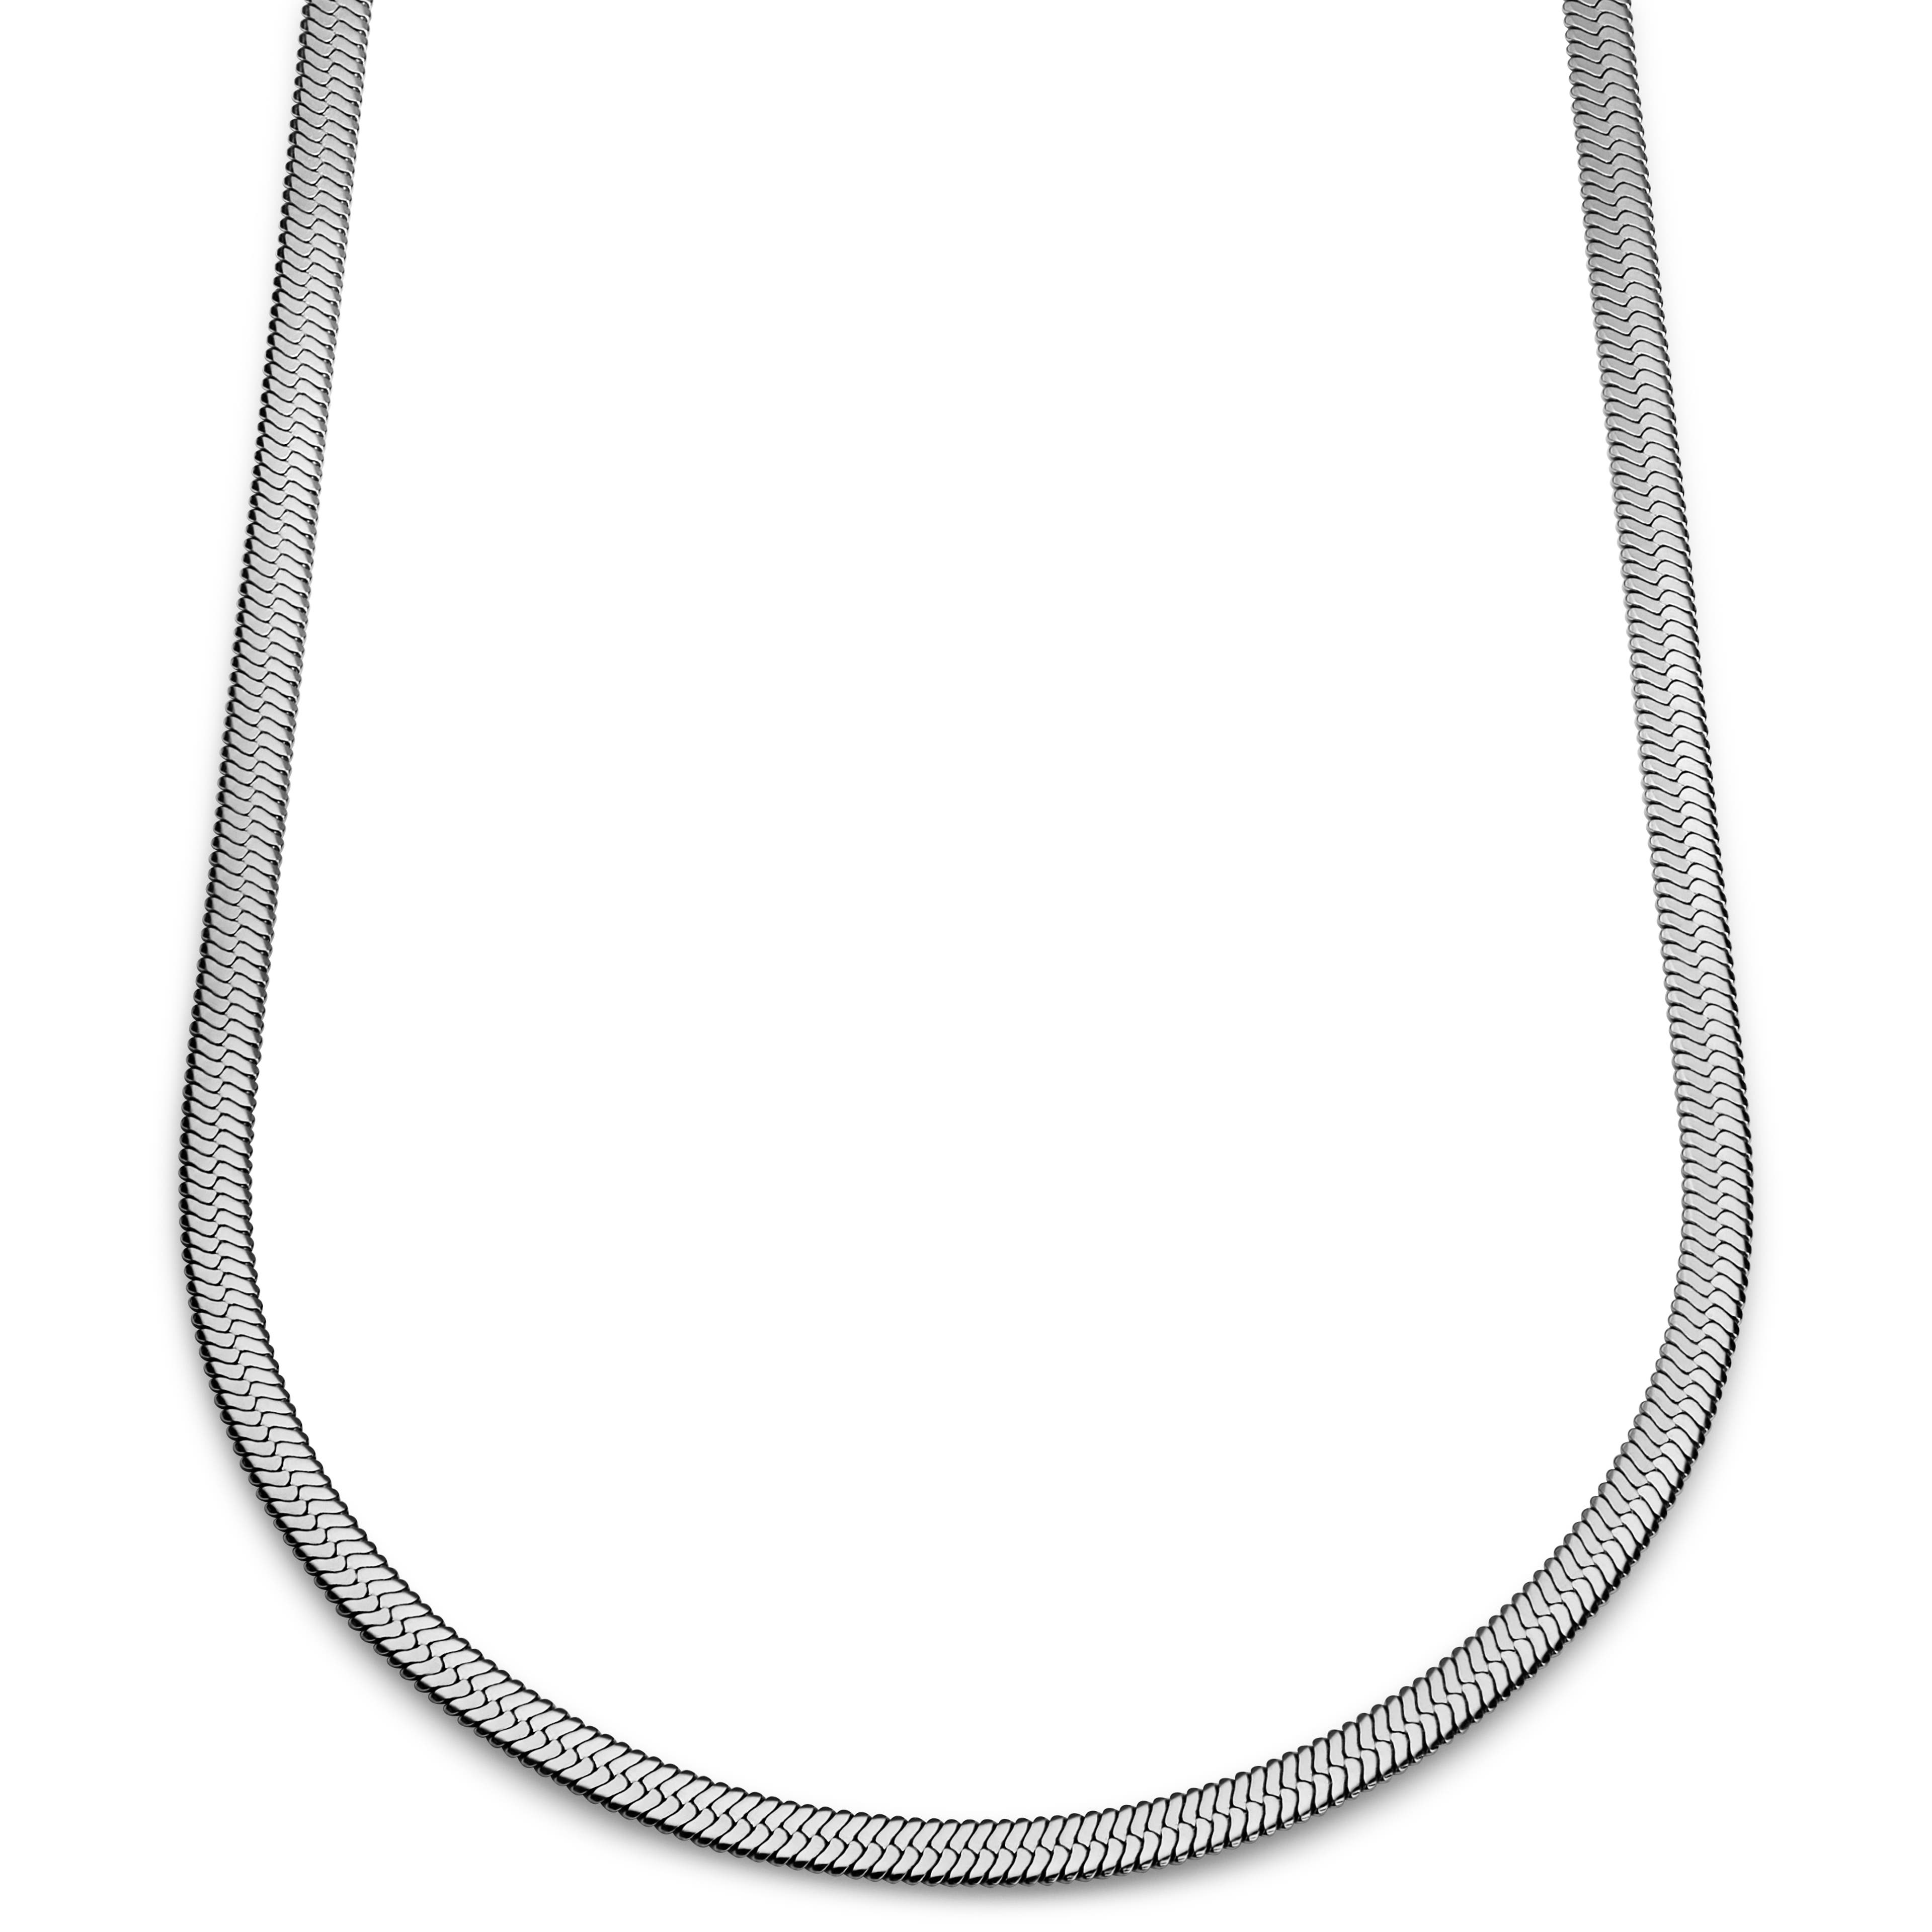 Argentia | 925s | 6 mm Rhodium-Plated Sterling Silver Herringbone Chain Necklace